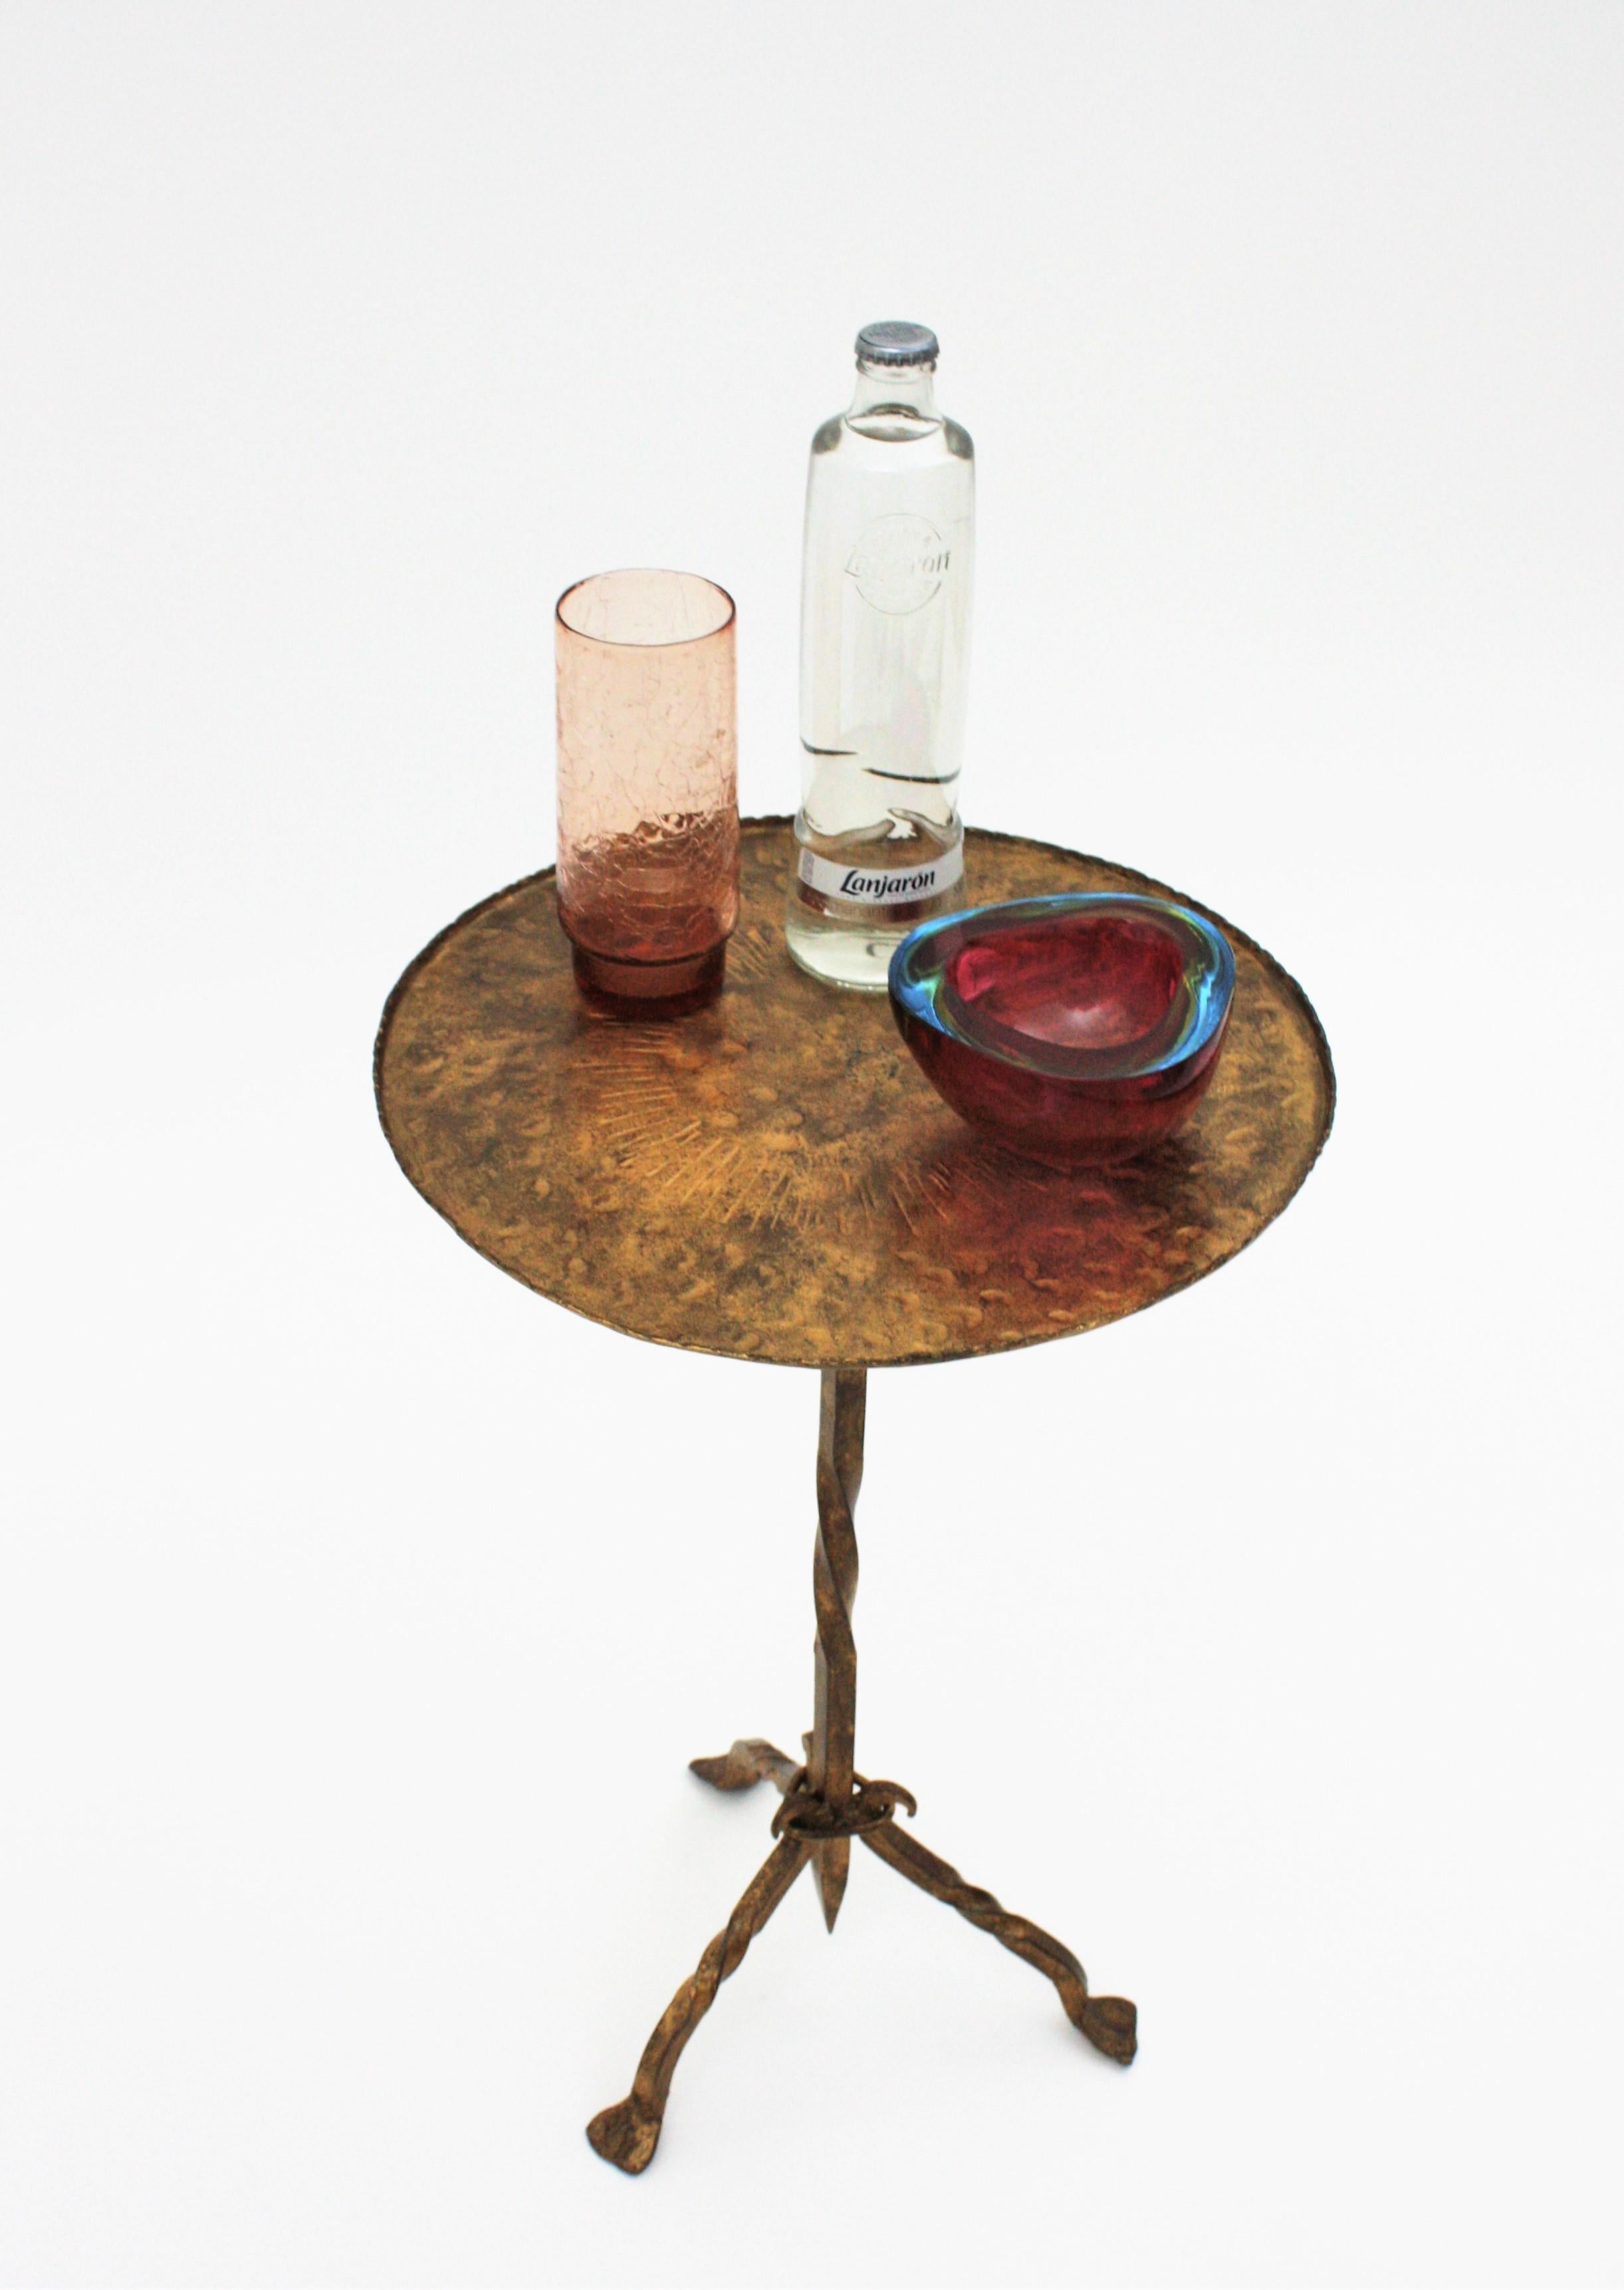 Beautiful hand-hammered gilt wrought iron occasional drinks table on a tripod base, Spain, 1940s-1950s.
This guéridon was handcrafted at the Mid-Century Modern period with Gothic style accents. It has a decoration with hammered stripe marks on the